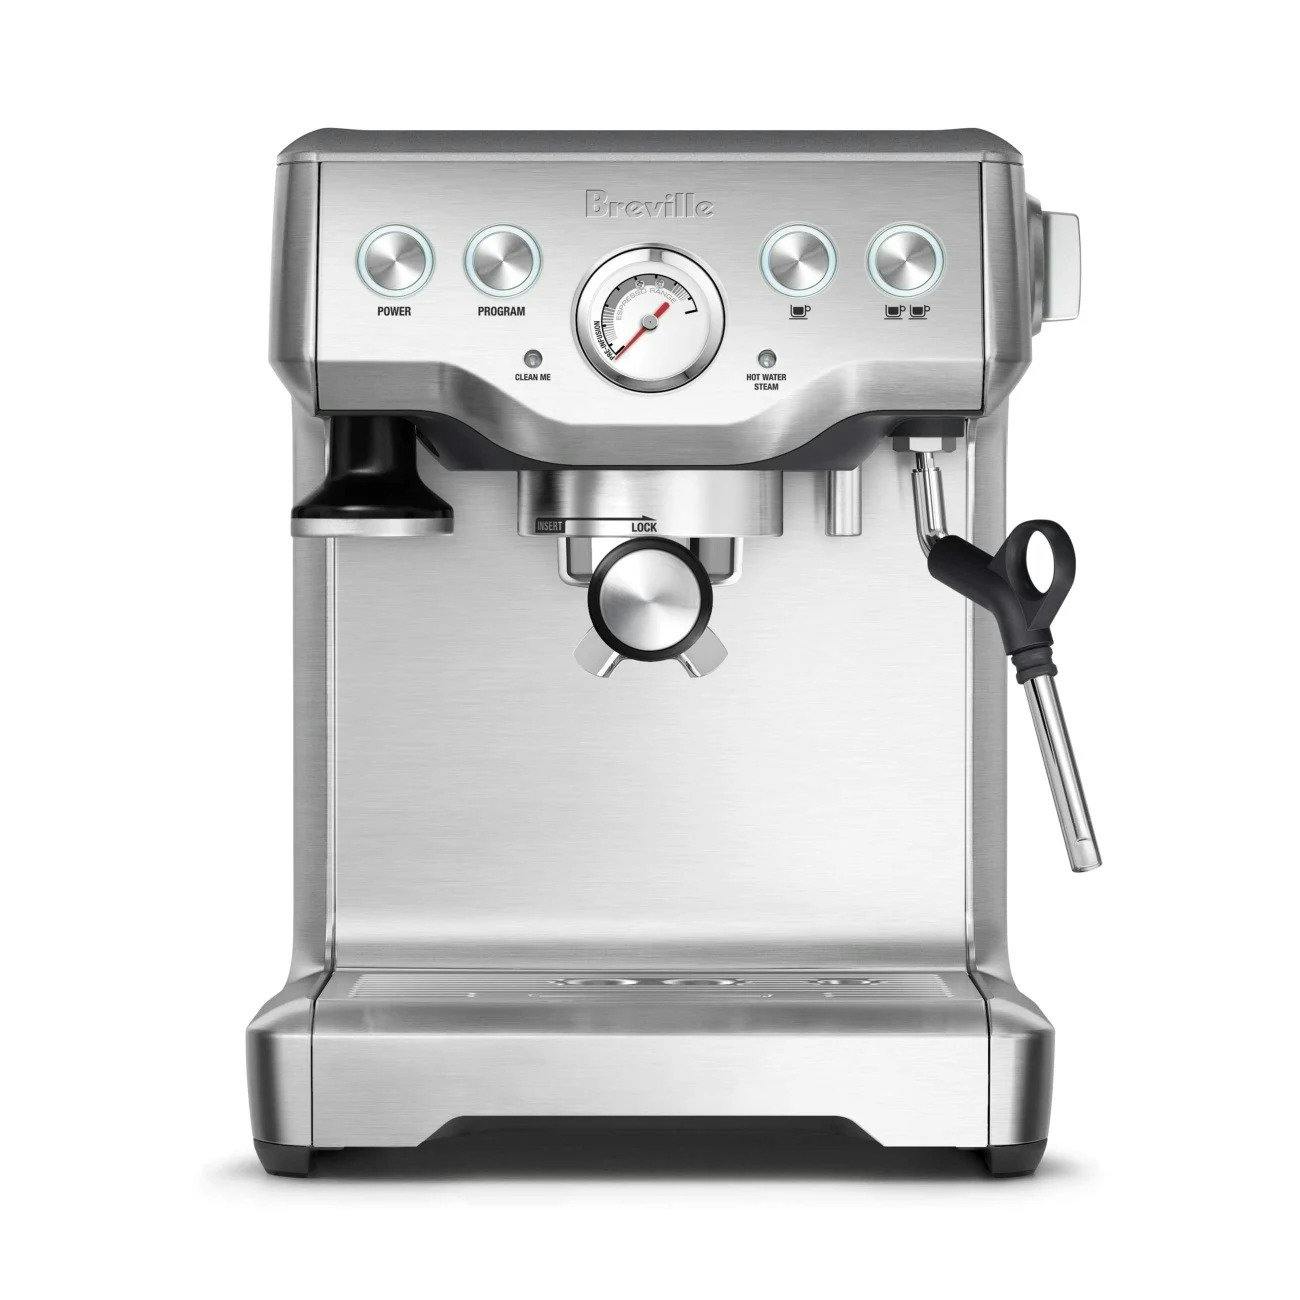 The Breville Infuser machine.